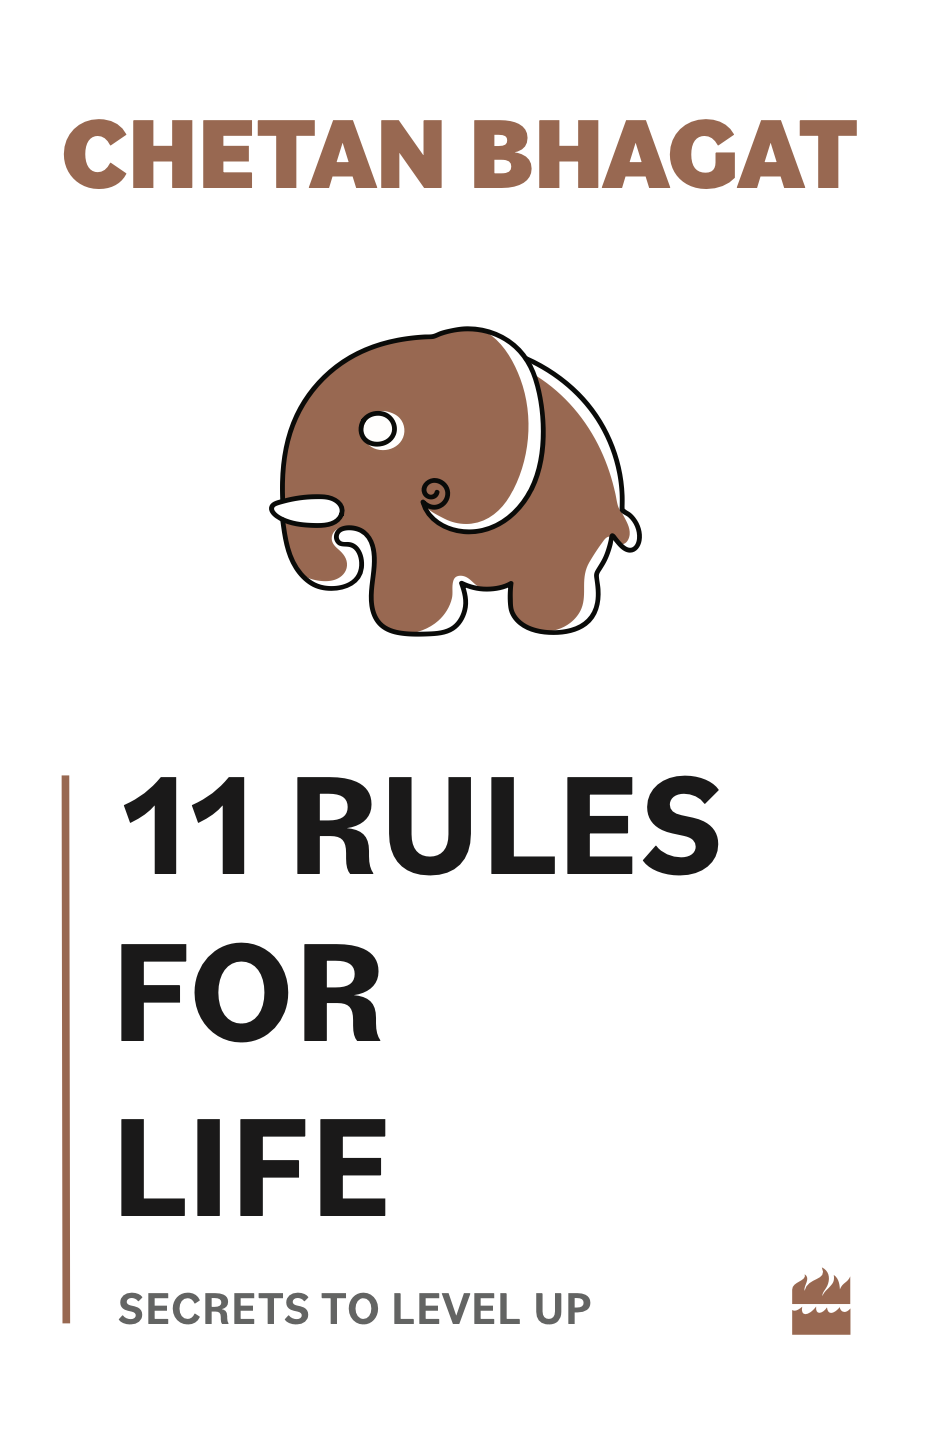 11 Rules for life